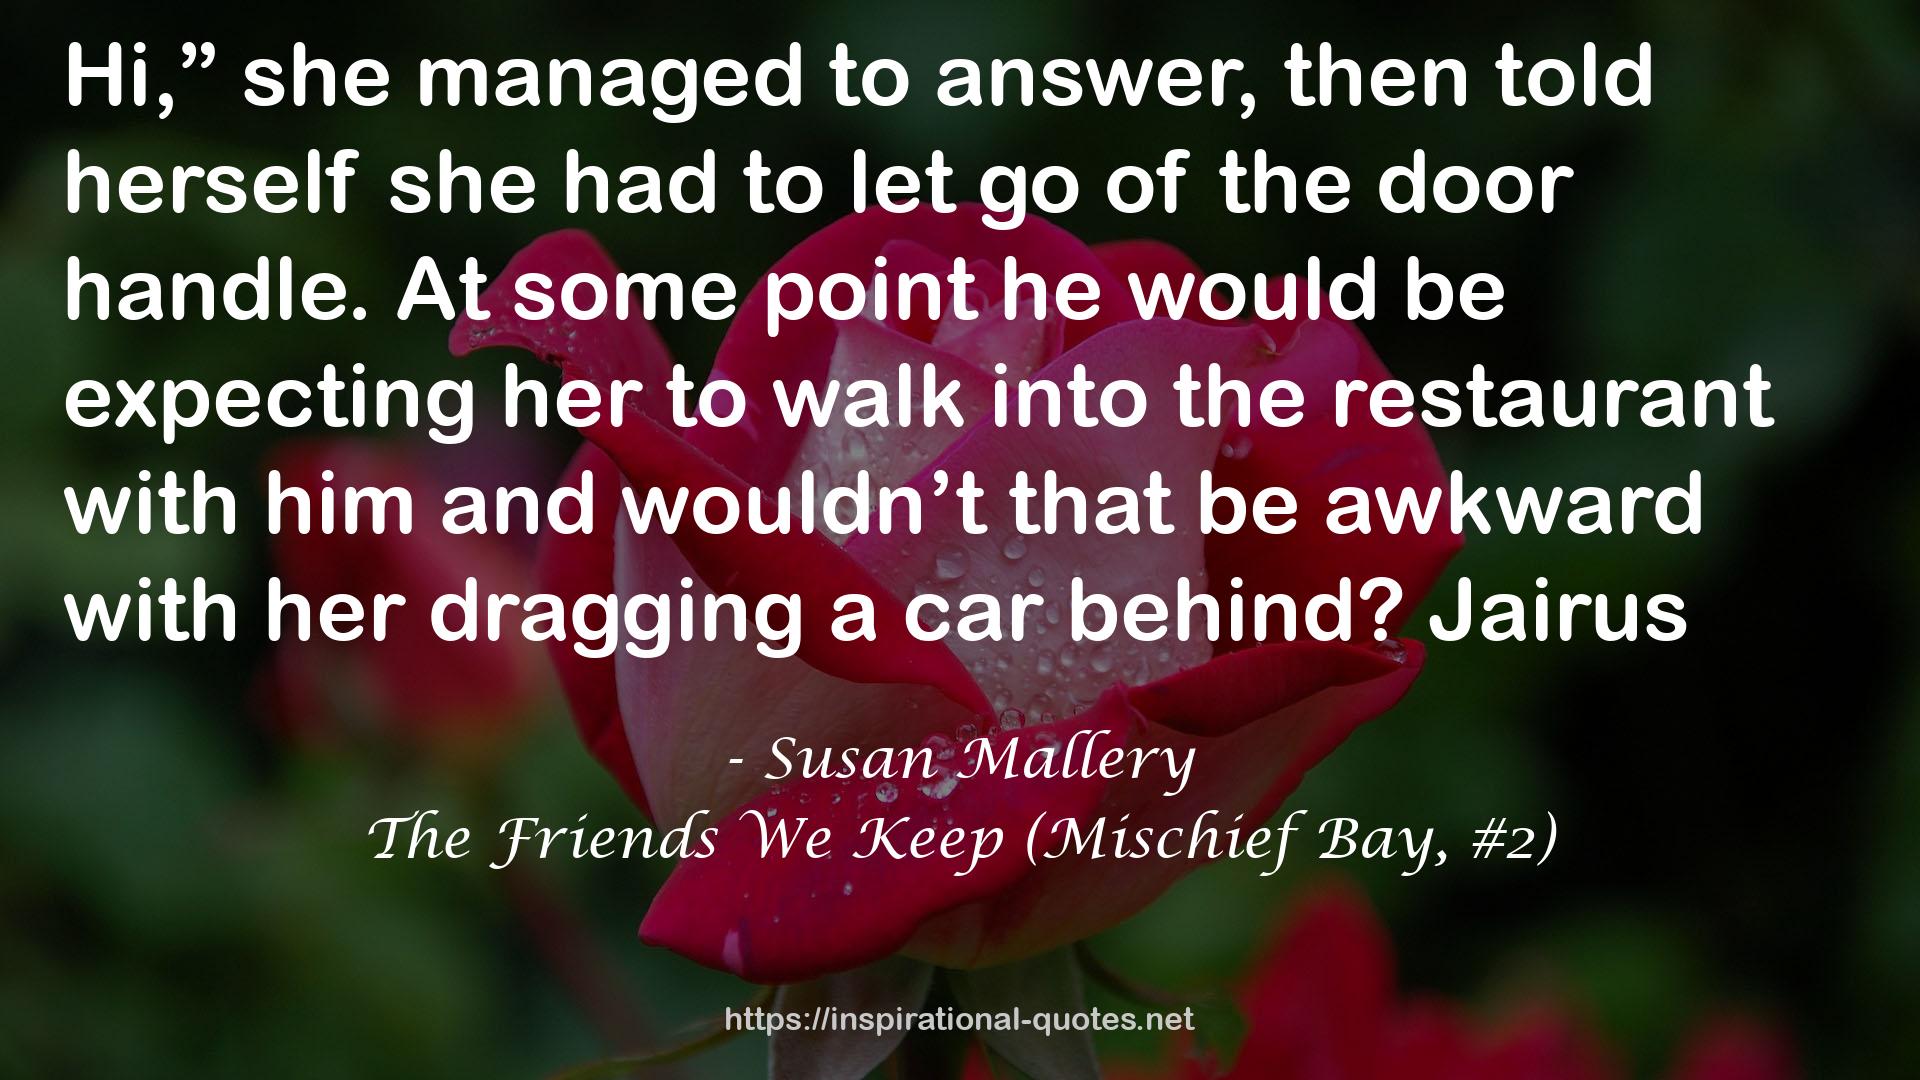 The Friends We Keep (Mischief Bay, #2) QUOTES